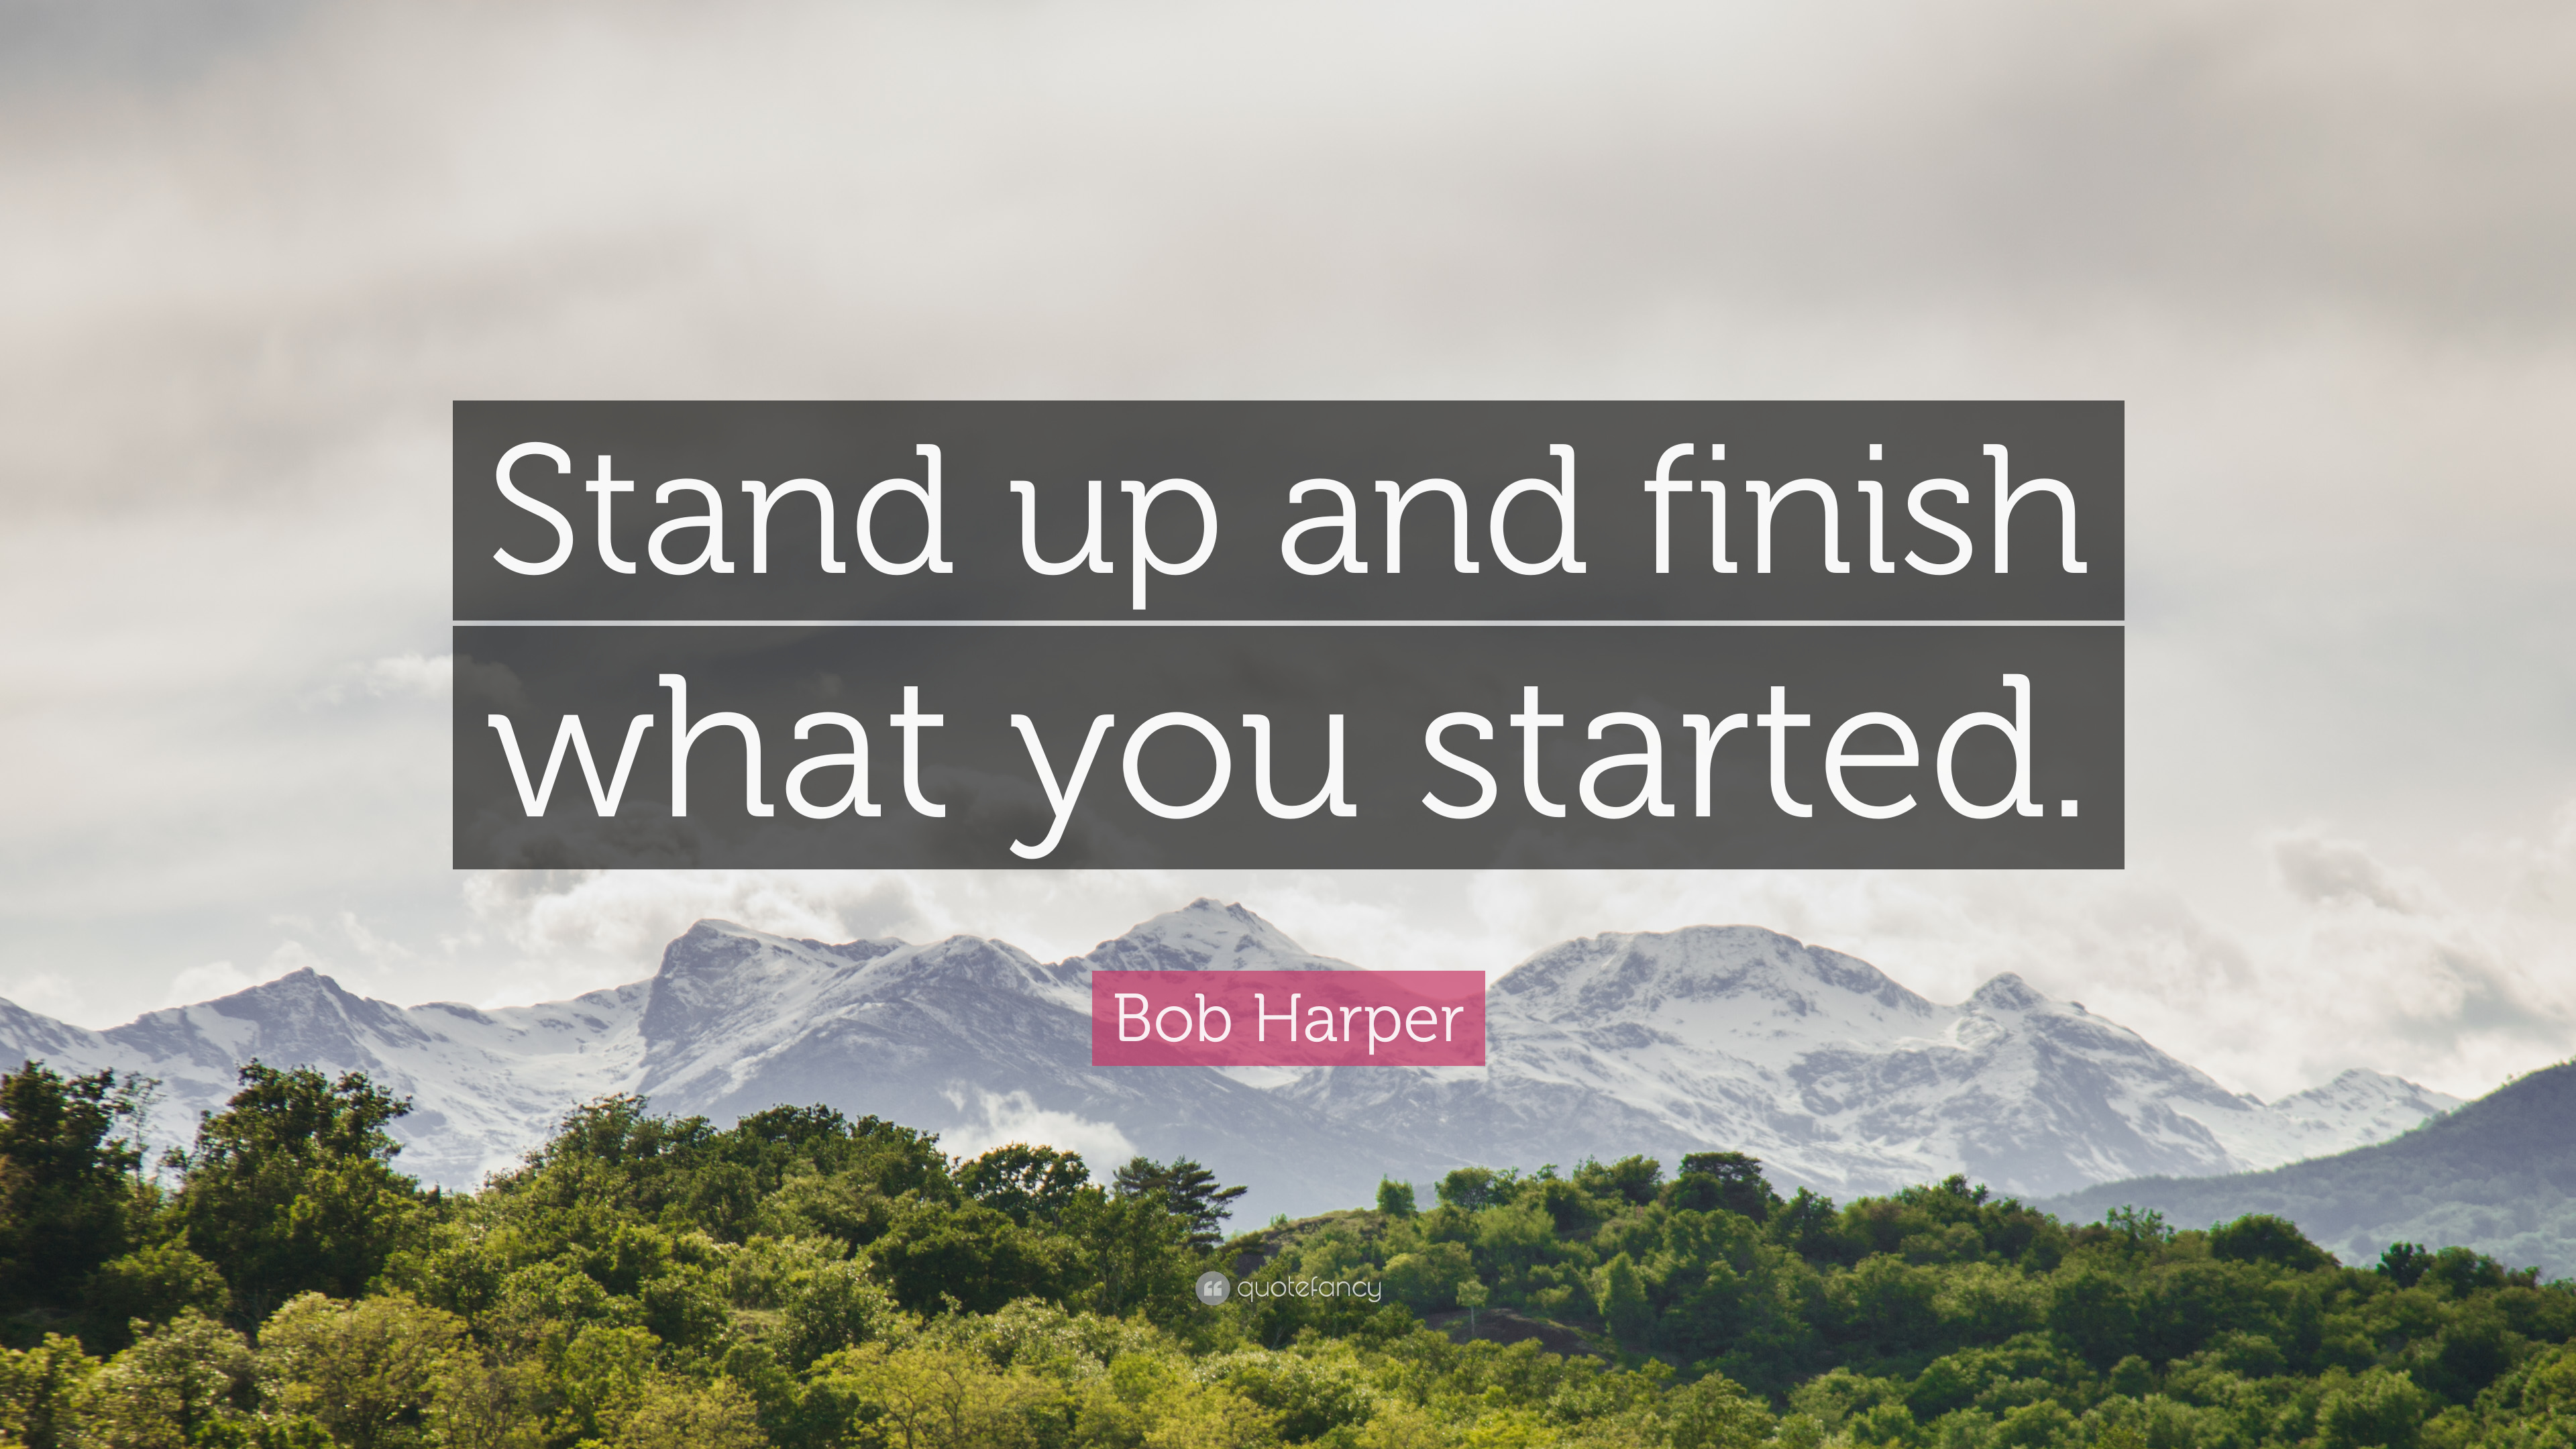 Bob Harper Quote: “Stand up and finish what you started.”